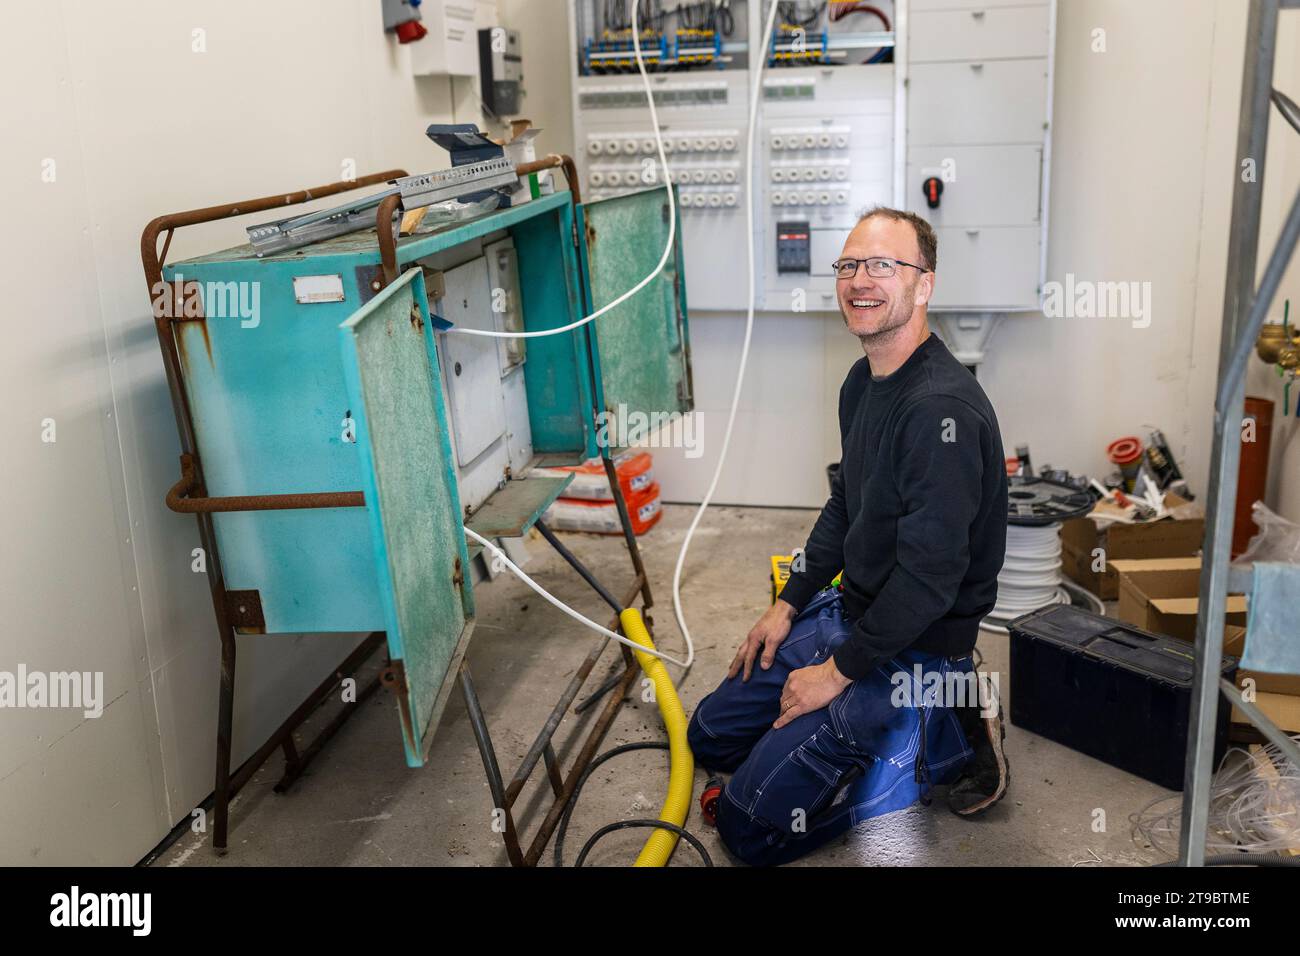 Smiling male electrician kneeling by electric panel in industry Stock Photo